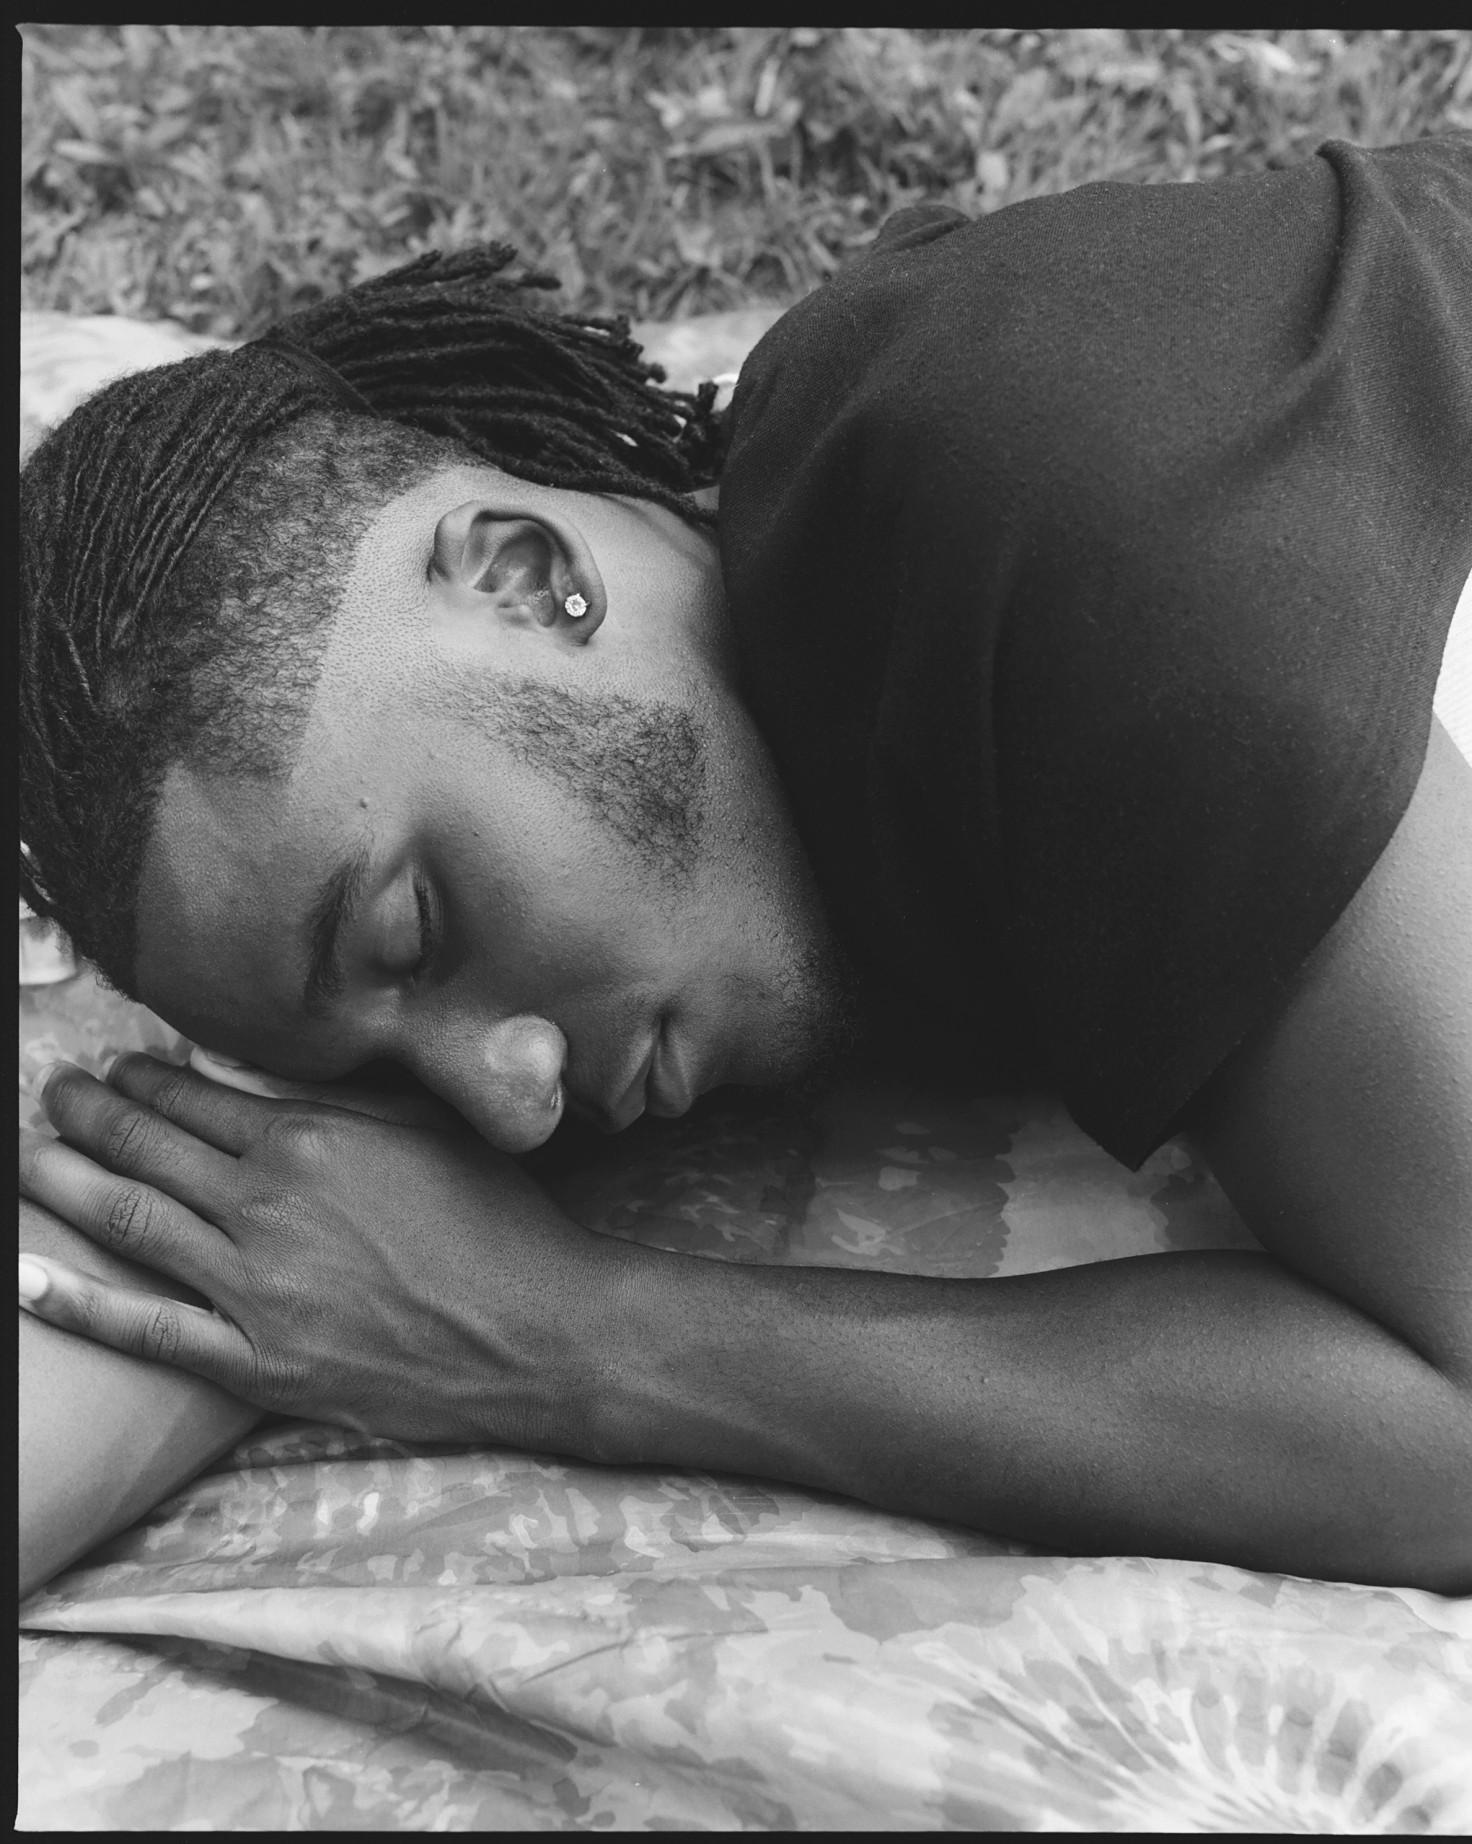 A Black person lays on a blanket on the ground. Their eyes closed and one arm resting on the other.